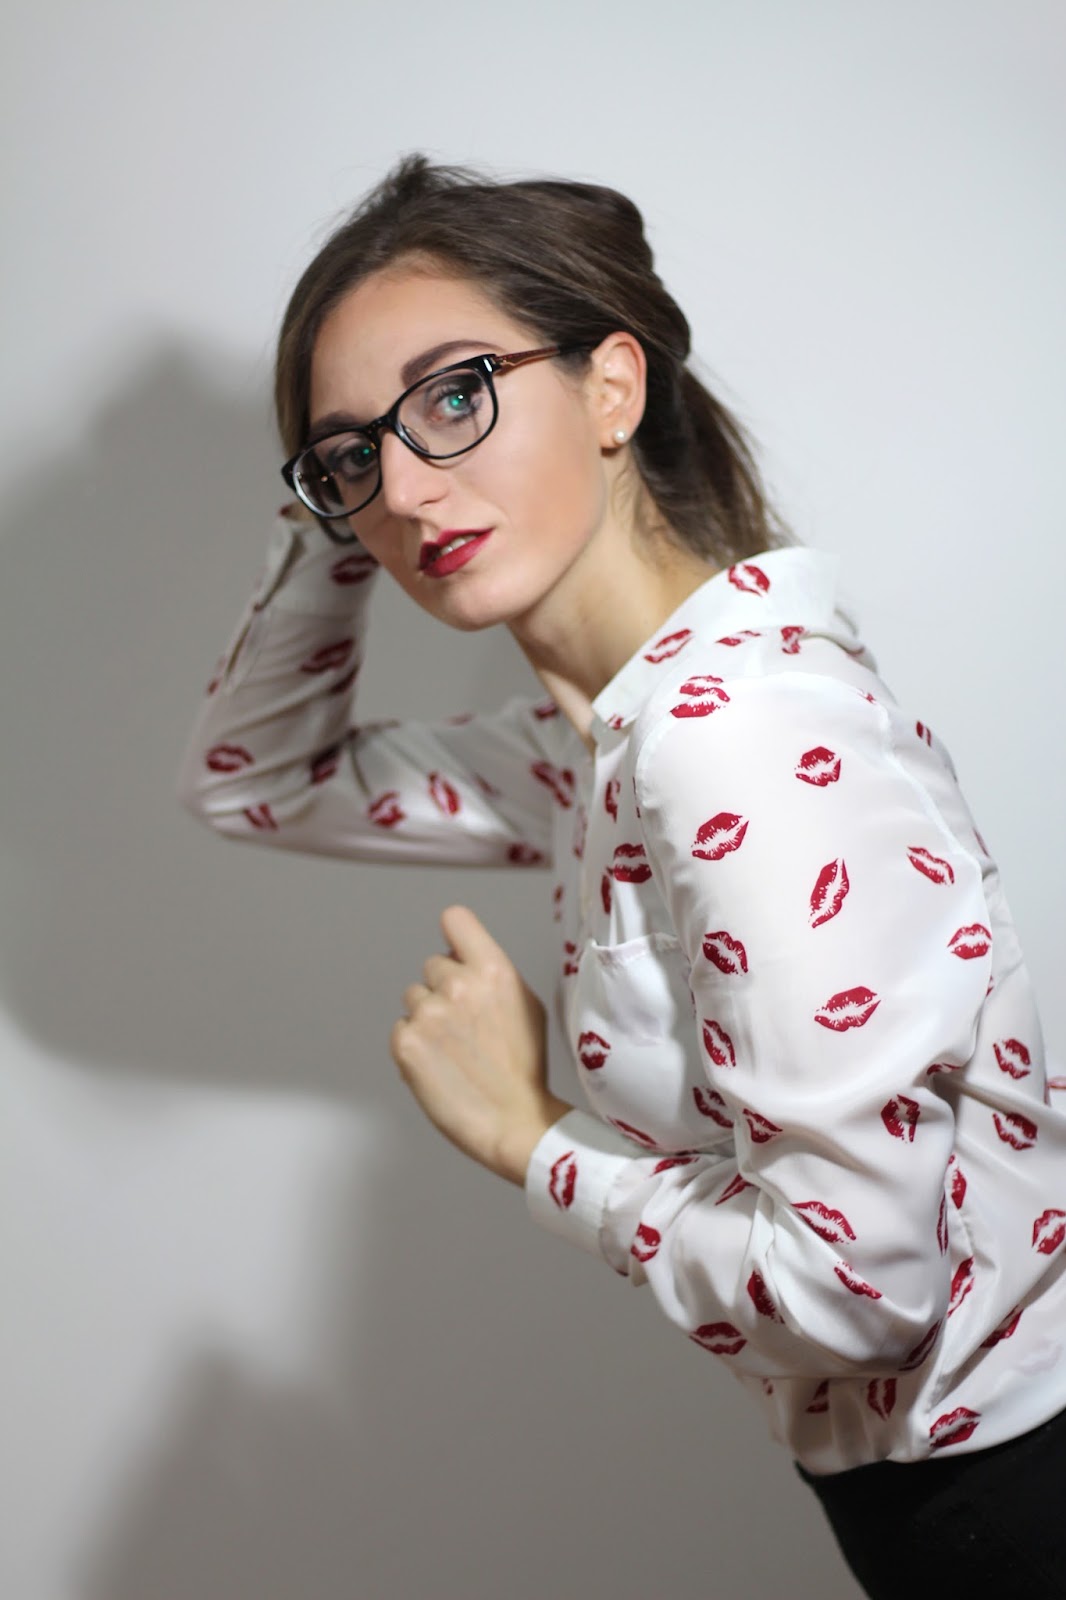 Occhiali Firmoo low cost glasses woman fashion blogger trend nerd girl 